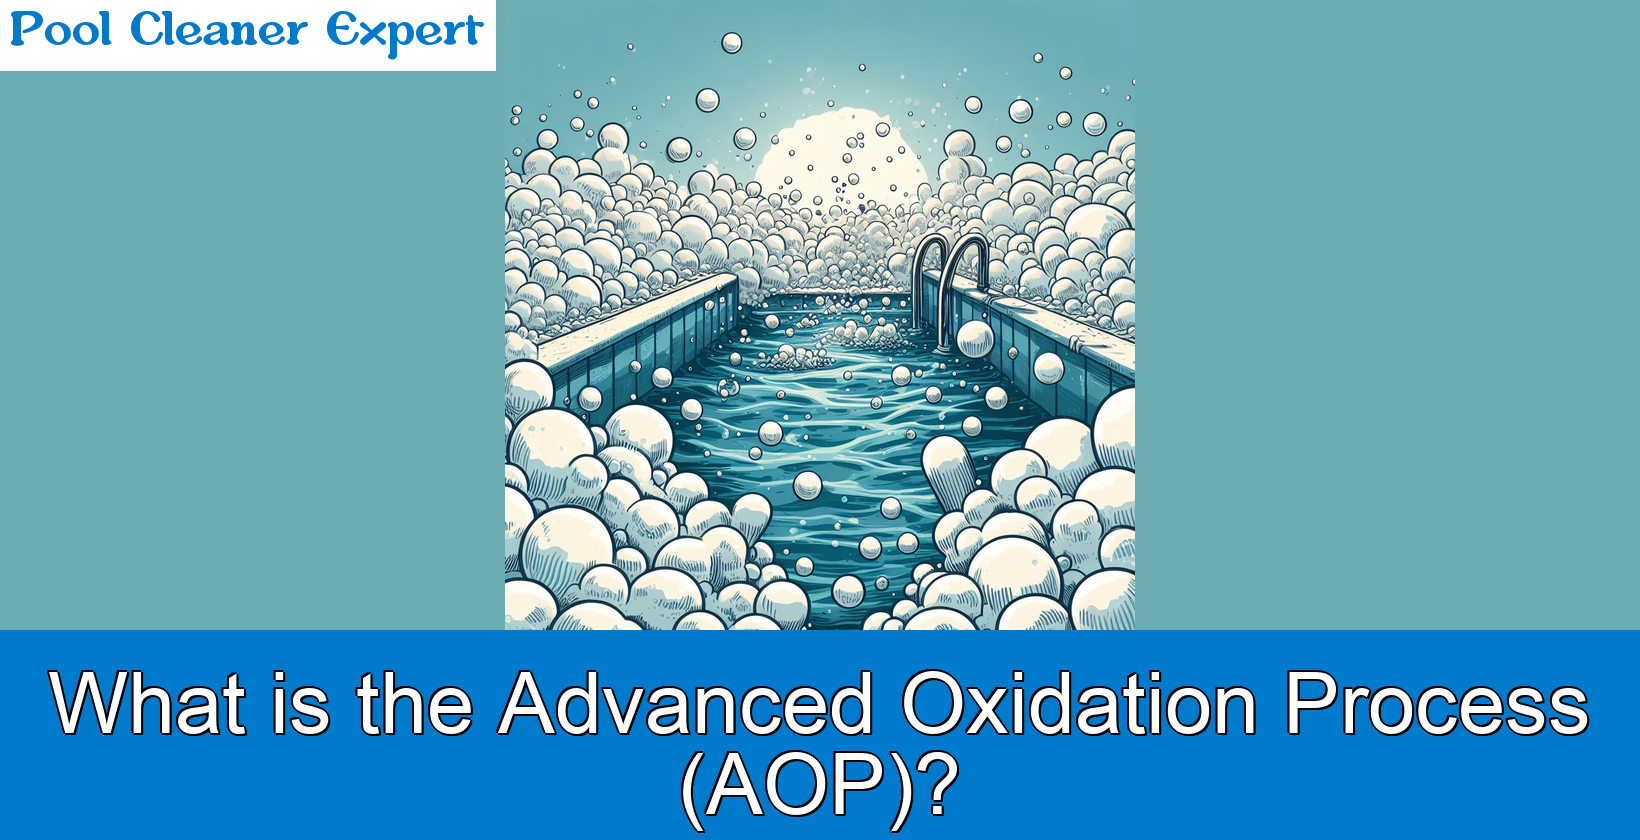 Advanced Oxidation Process (AOP) in Pools: All You Need to Know